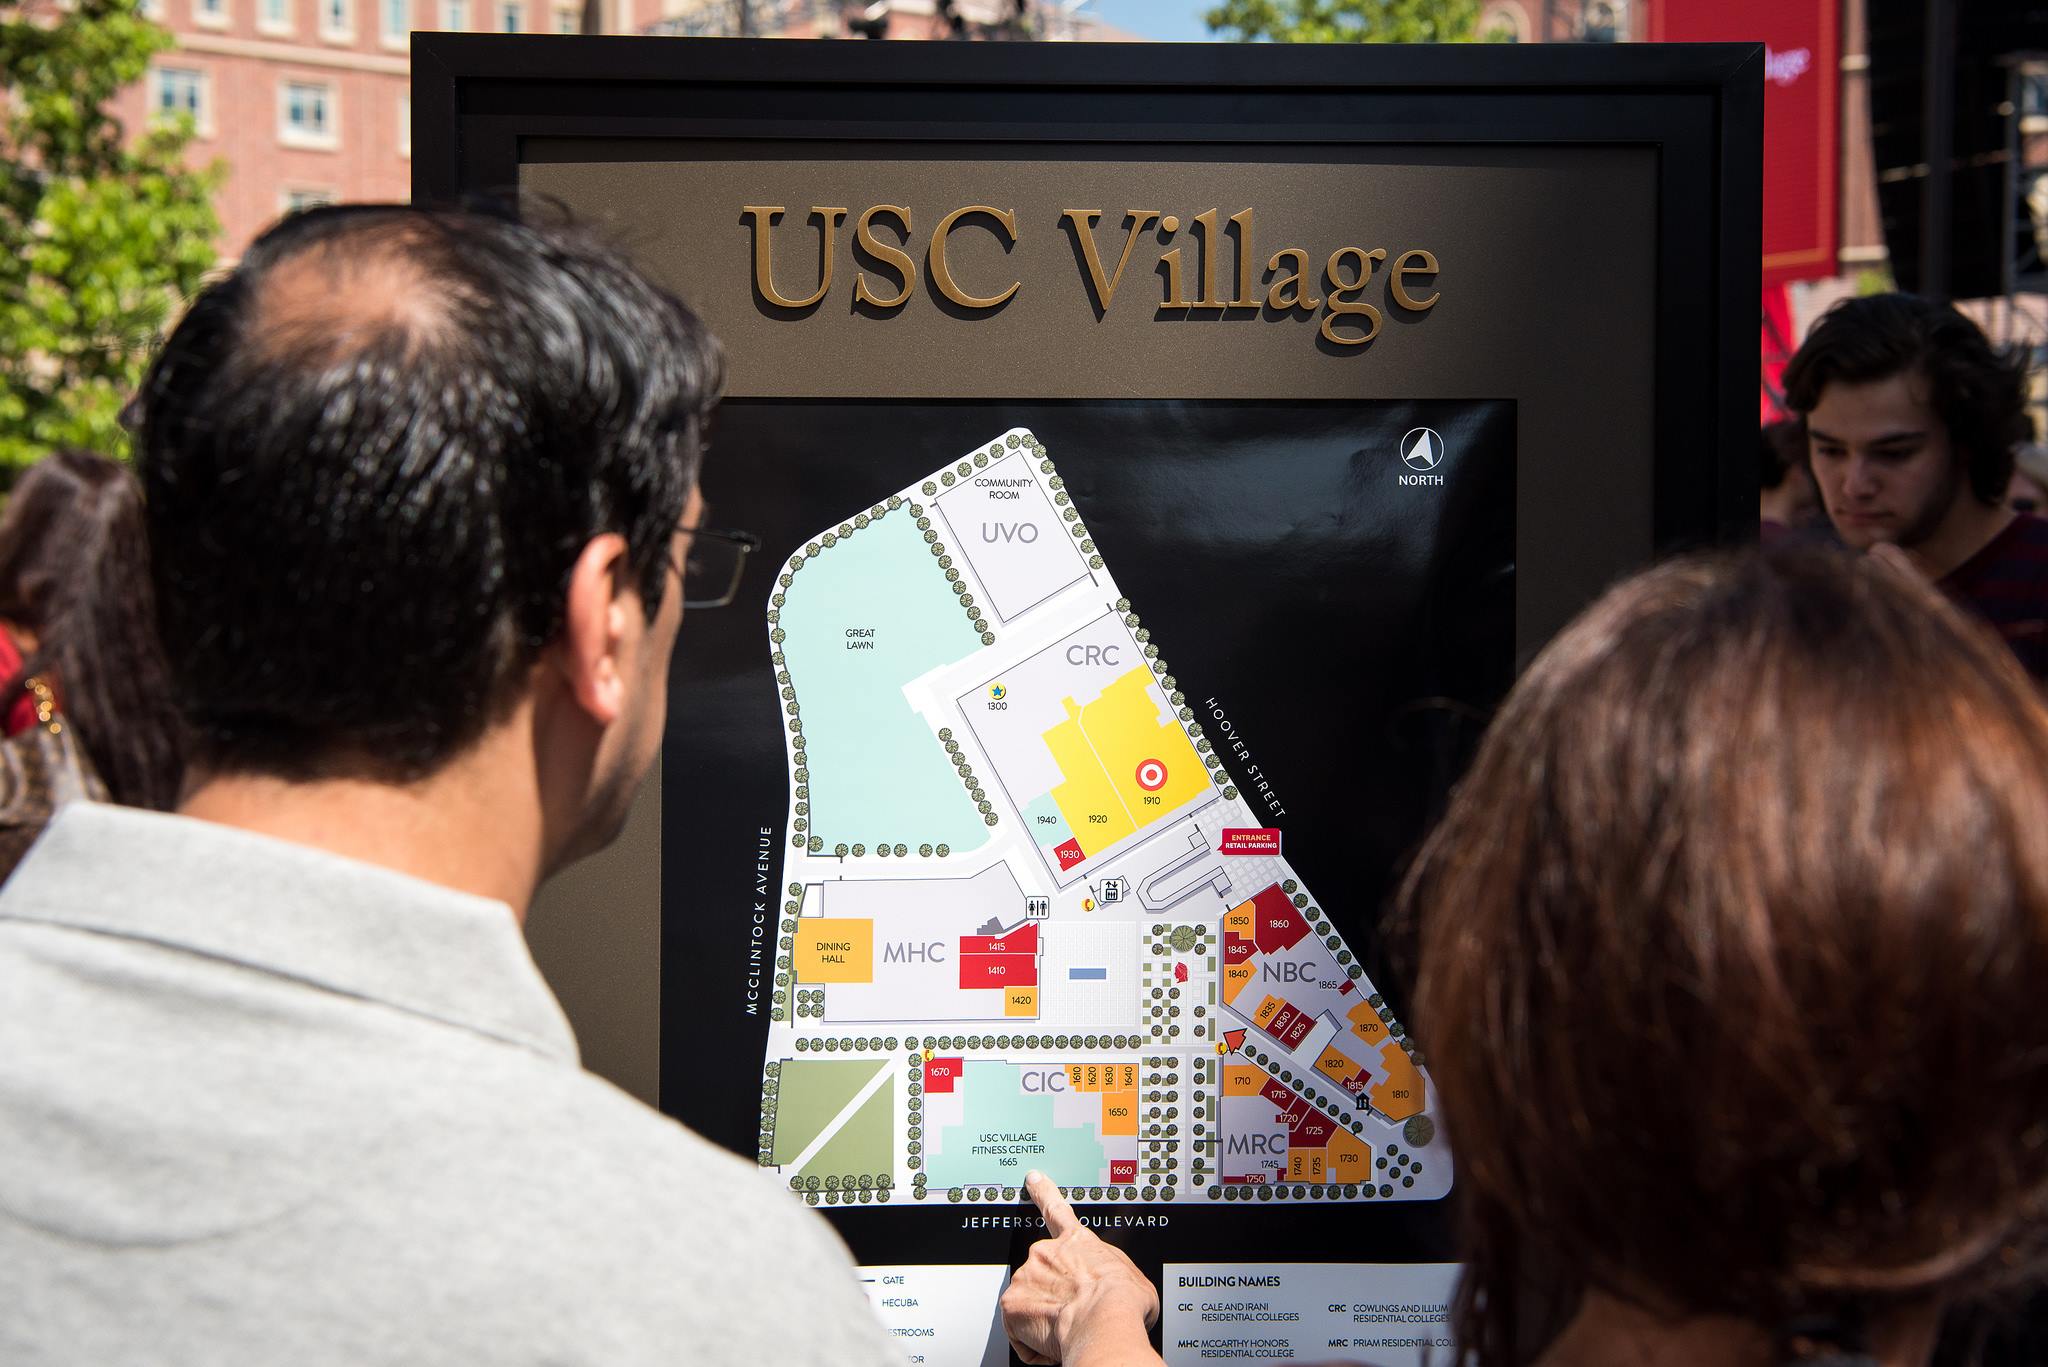 Onlookers point at a map at USC Village.